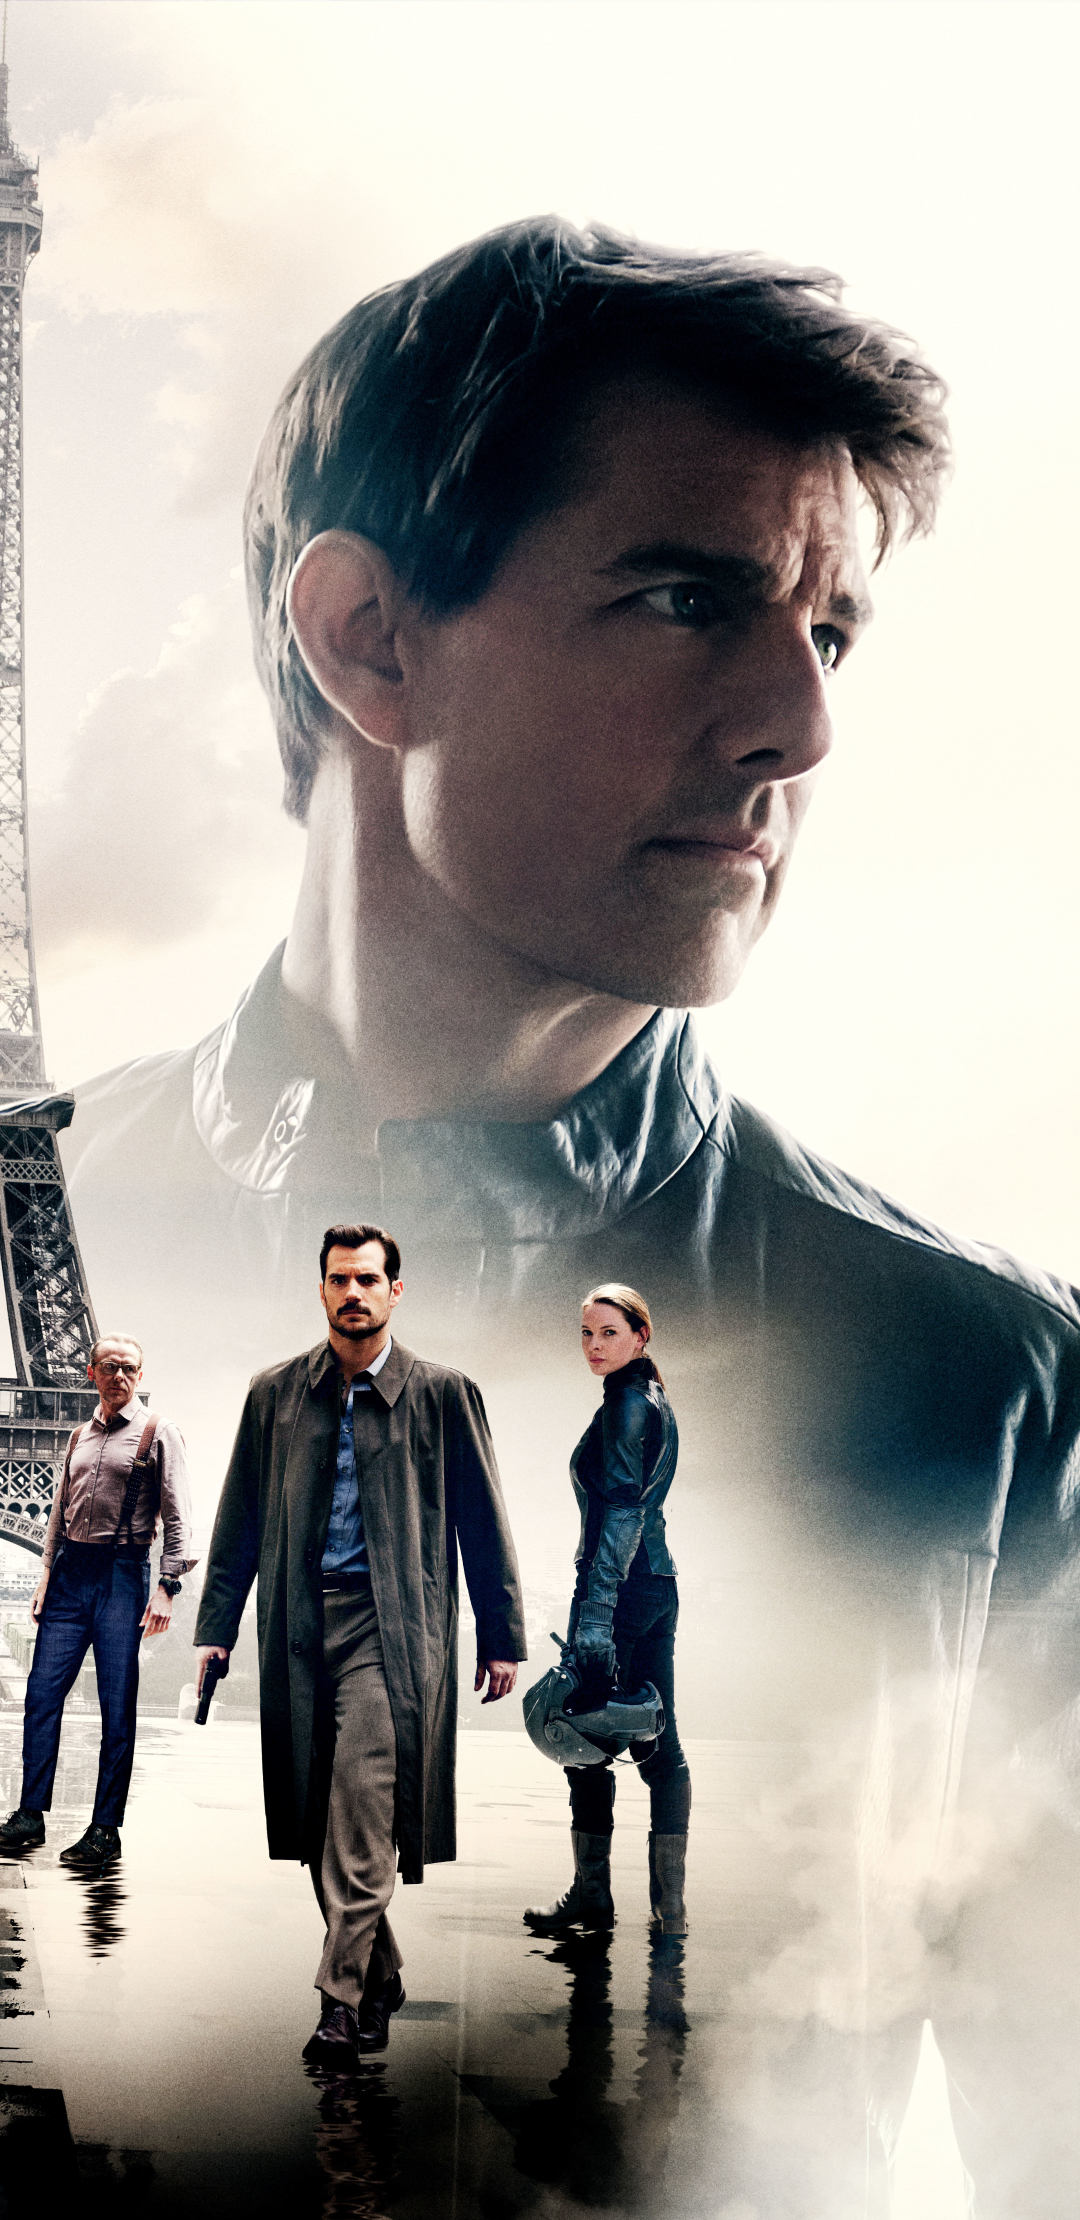 rebecca ferguson, movie, mission: impossible fallout, simon pegg, tom cruise, henry cavill, ilsa faust, ethan hunt, benji dunn, august walker, alan hunley, mission: impossible